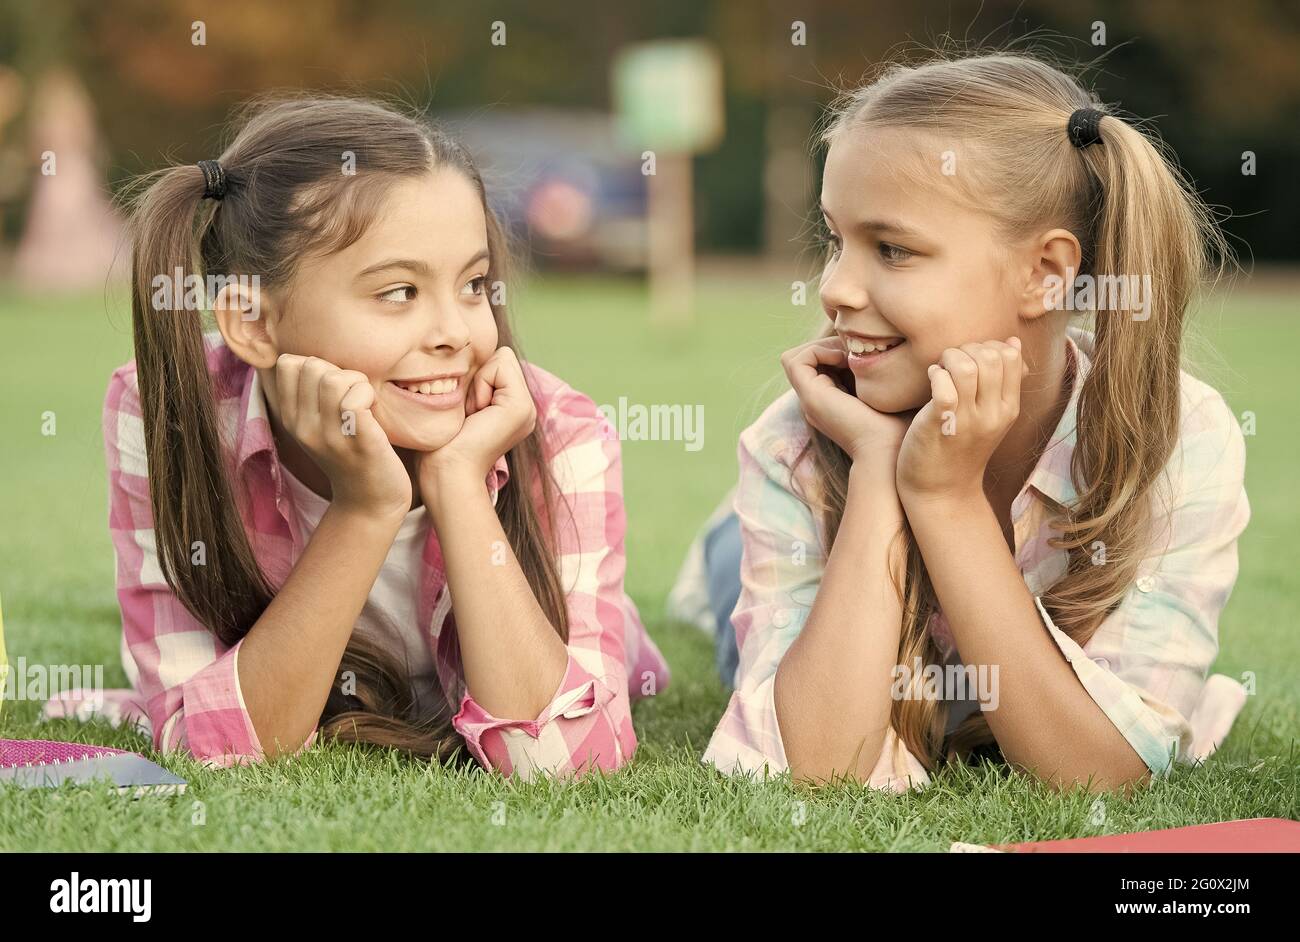 Youre awesome just like me. Happy children relax on green grass. Beauty look of small children. Little children enjoy happy childhood. International Stock Photo